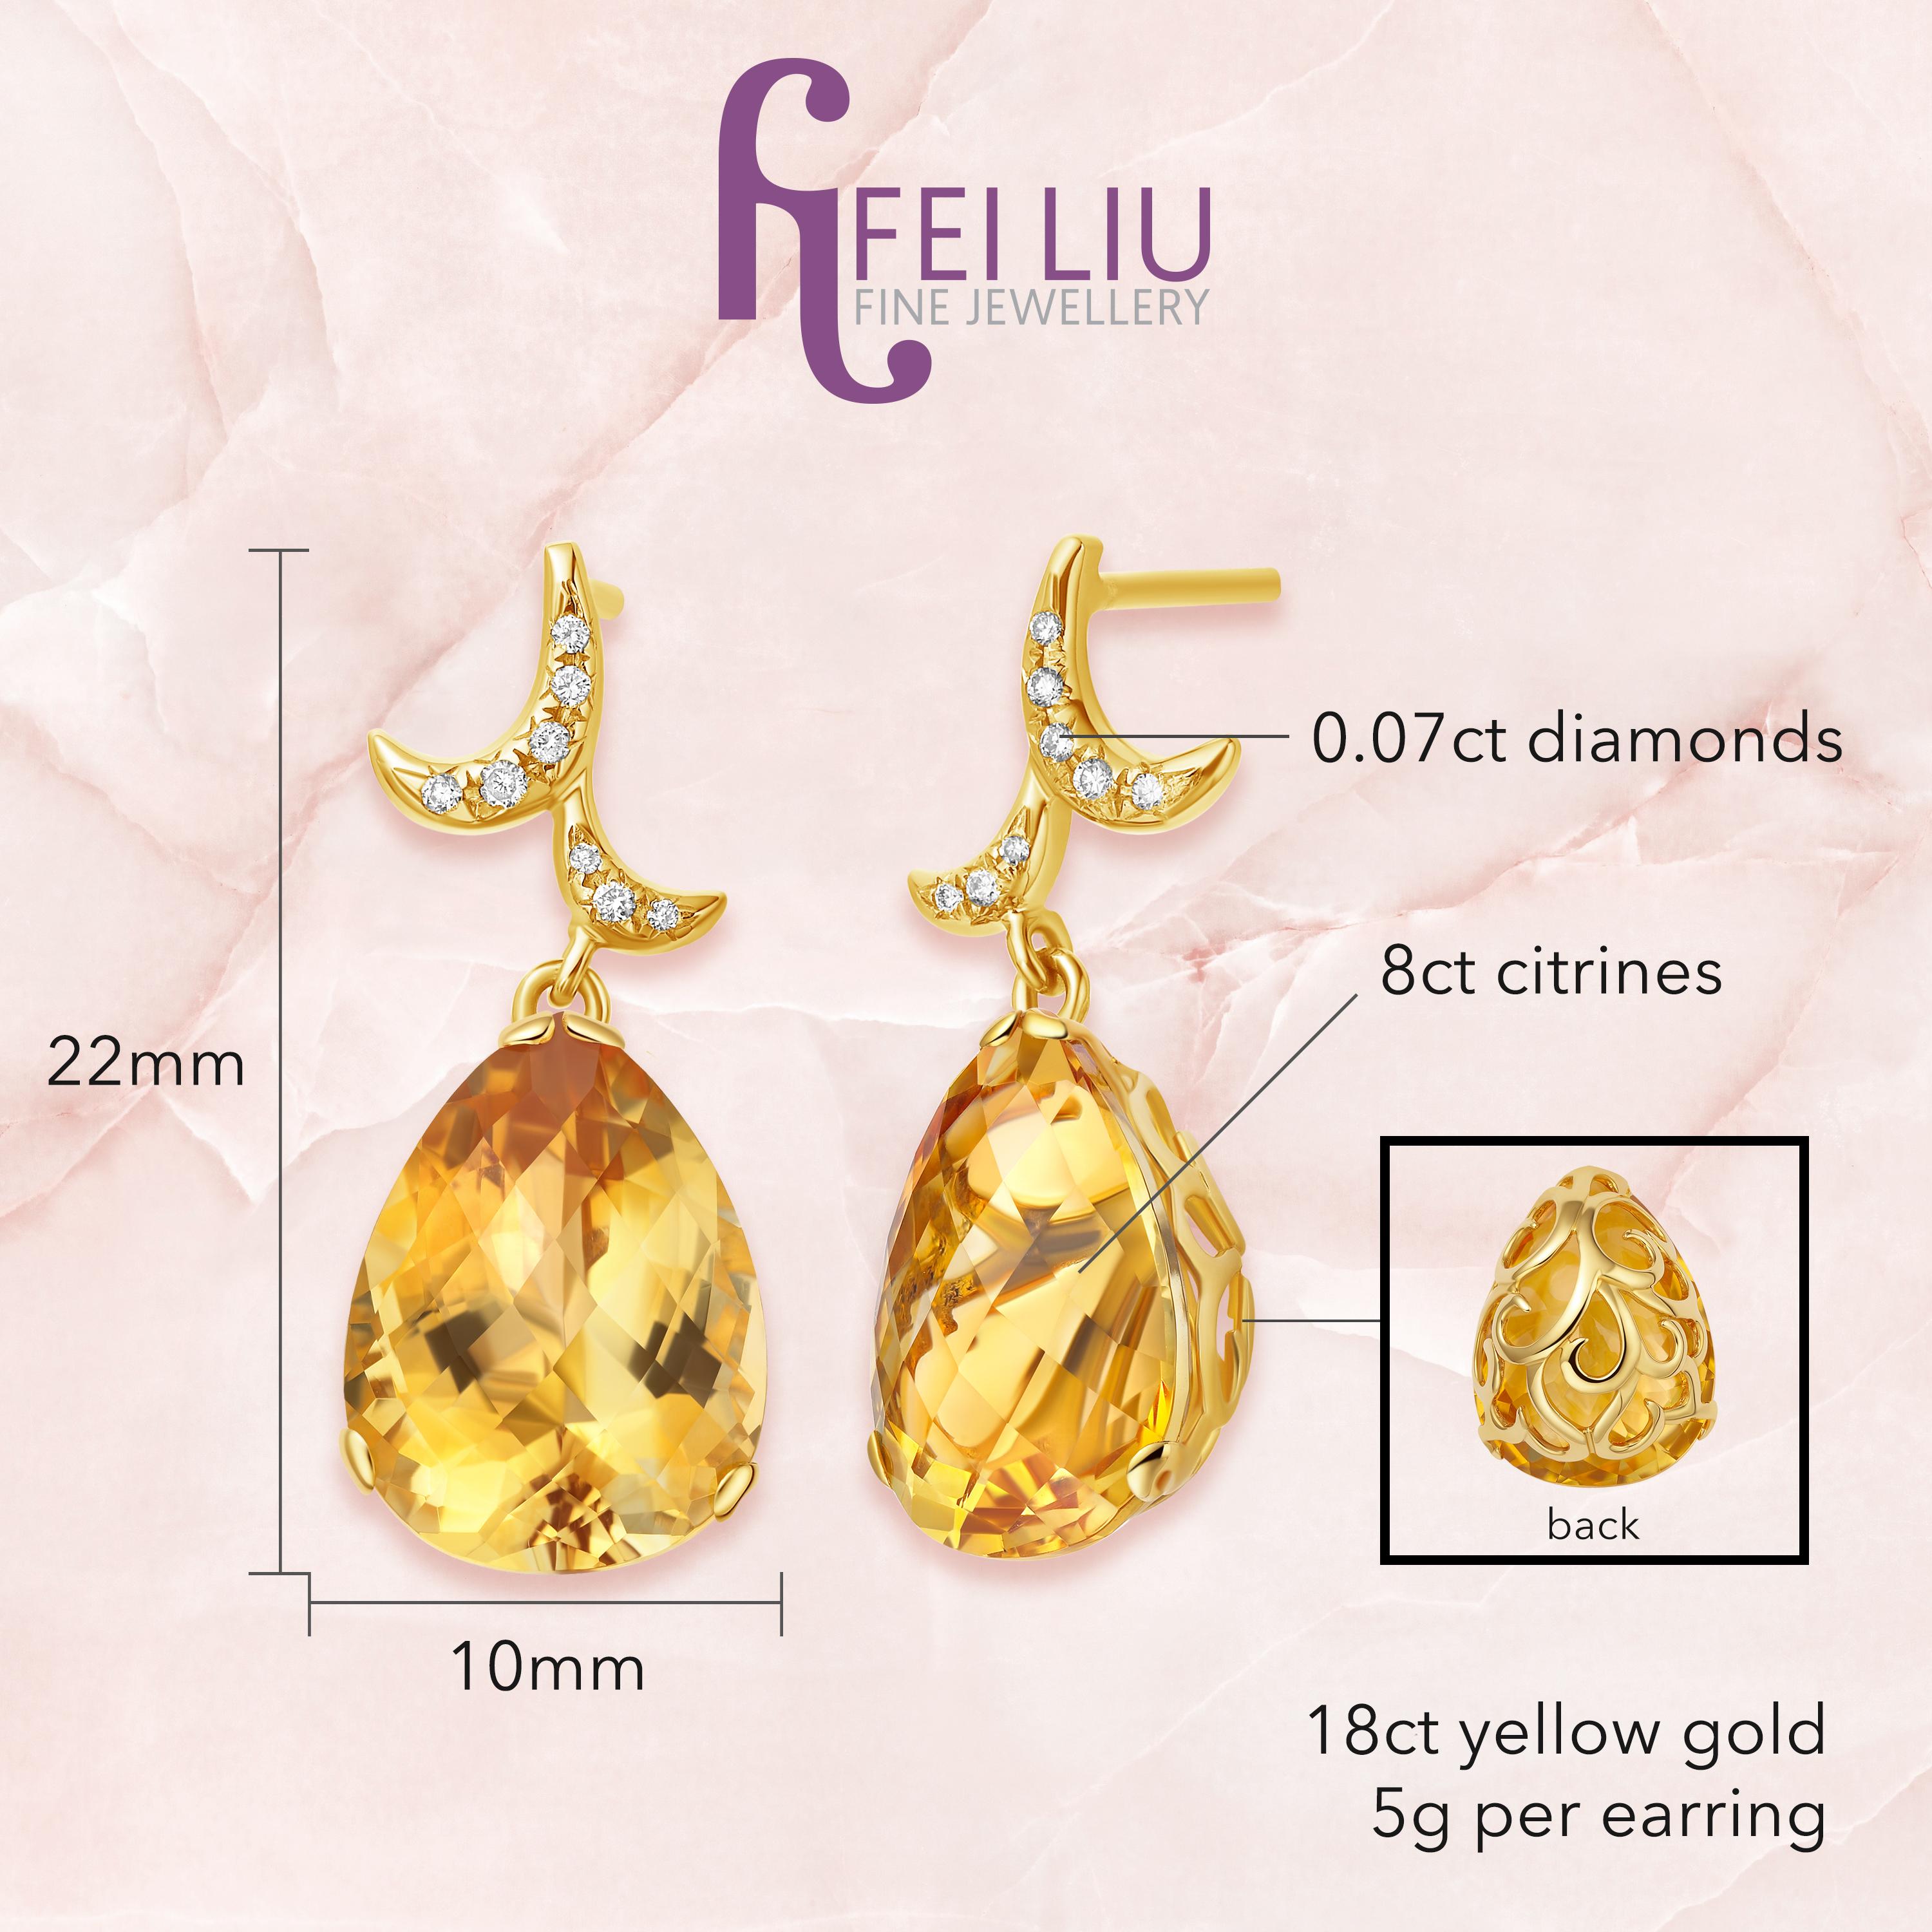 Description:
Whispering small pear stone drop earrings with 8ct citrines and 0.07ct diamonds, set in an 18ct yellow gold filigree setting.

Inspiration:
Emulating femininity and glamour, the Whispering collection is full of colour and form. Inspired